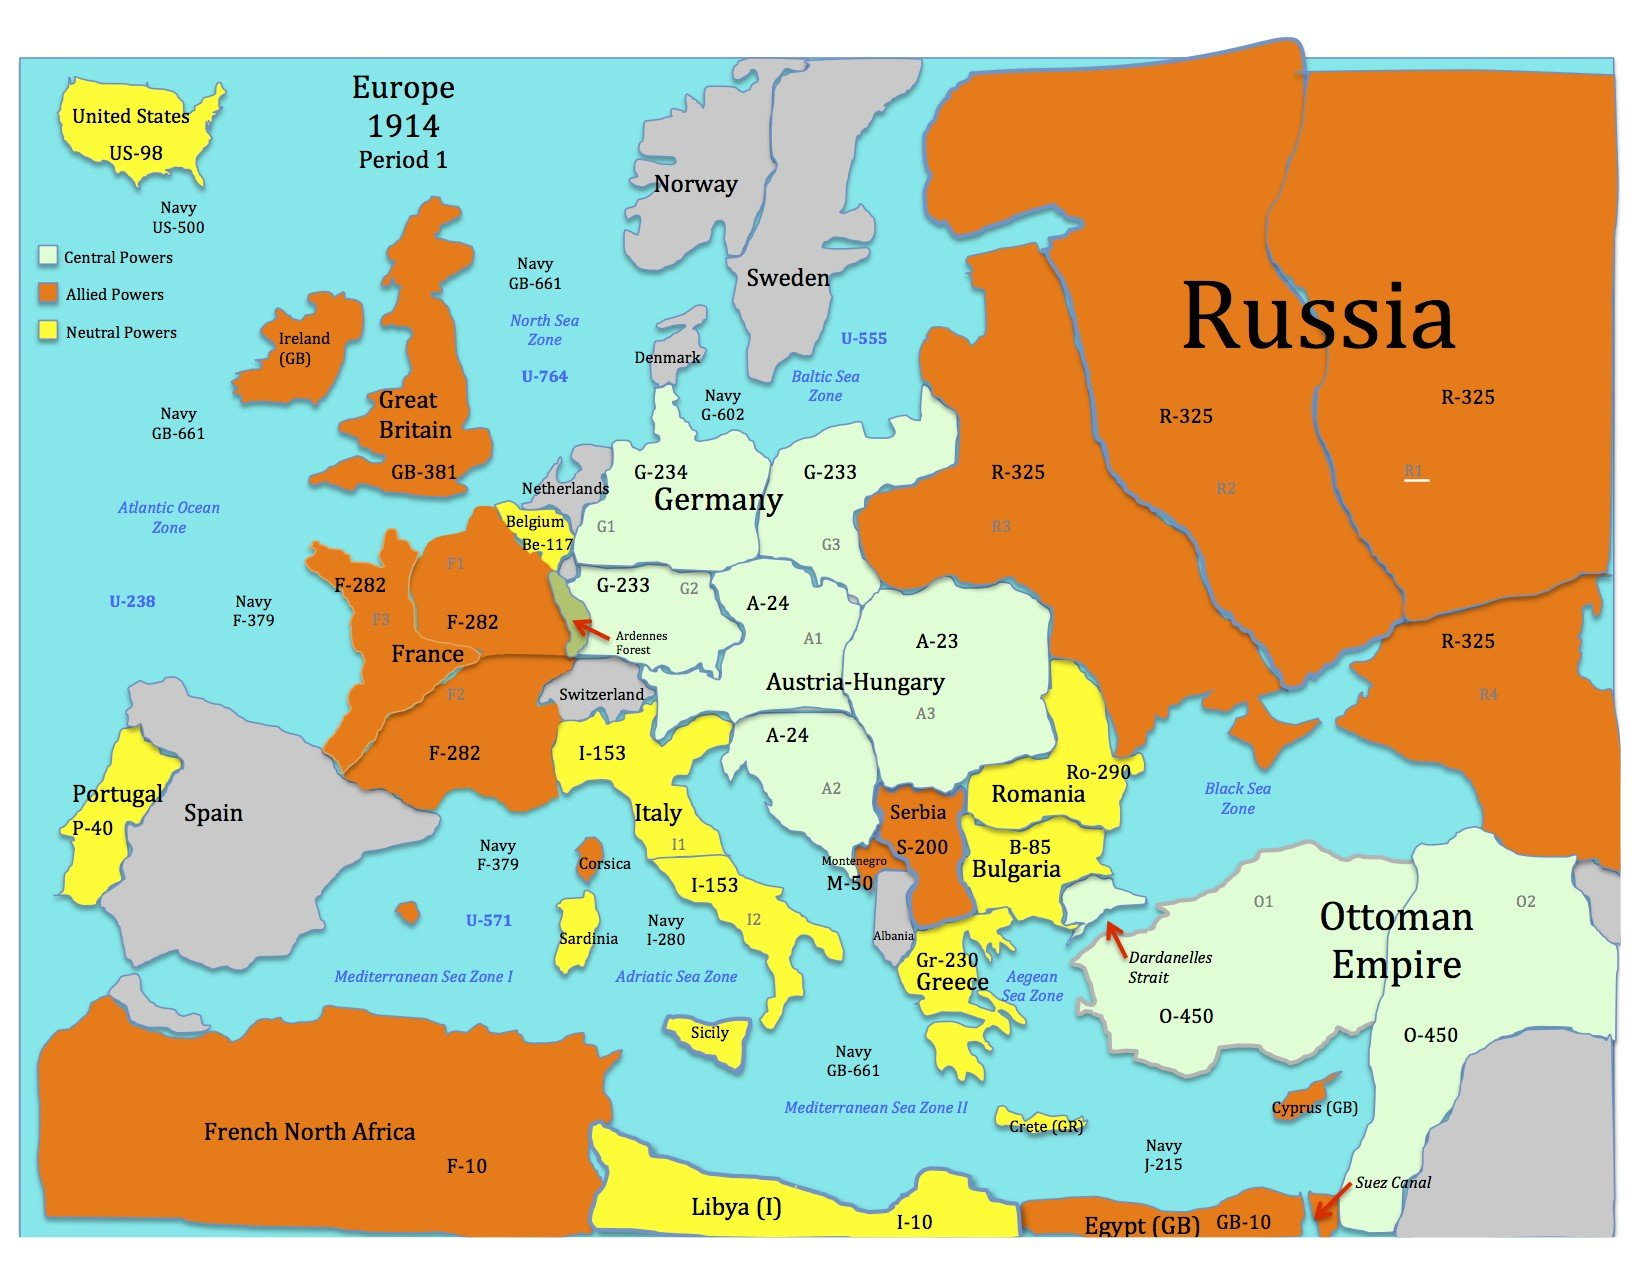 Europe After World War 1 Map Worksheet Answers  Yooob For Europe After World War 1 Map Worksheet Answers